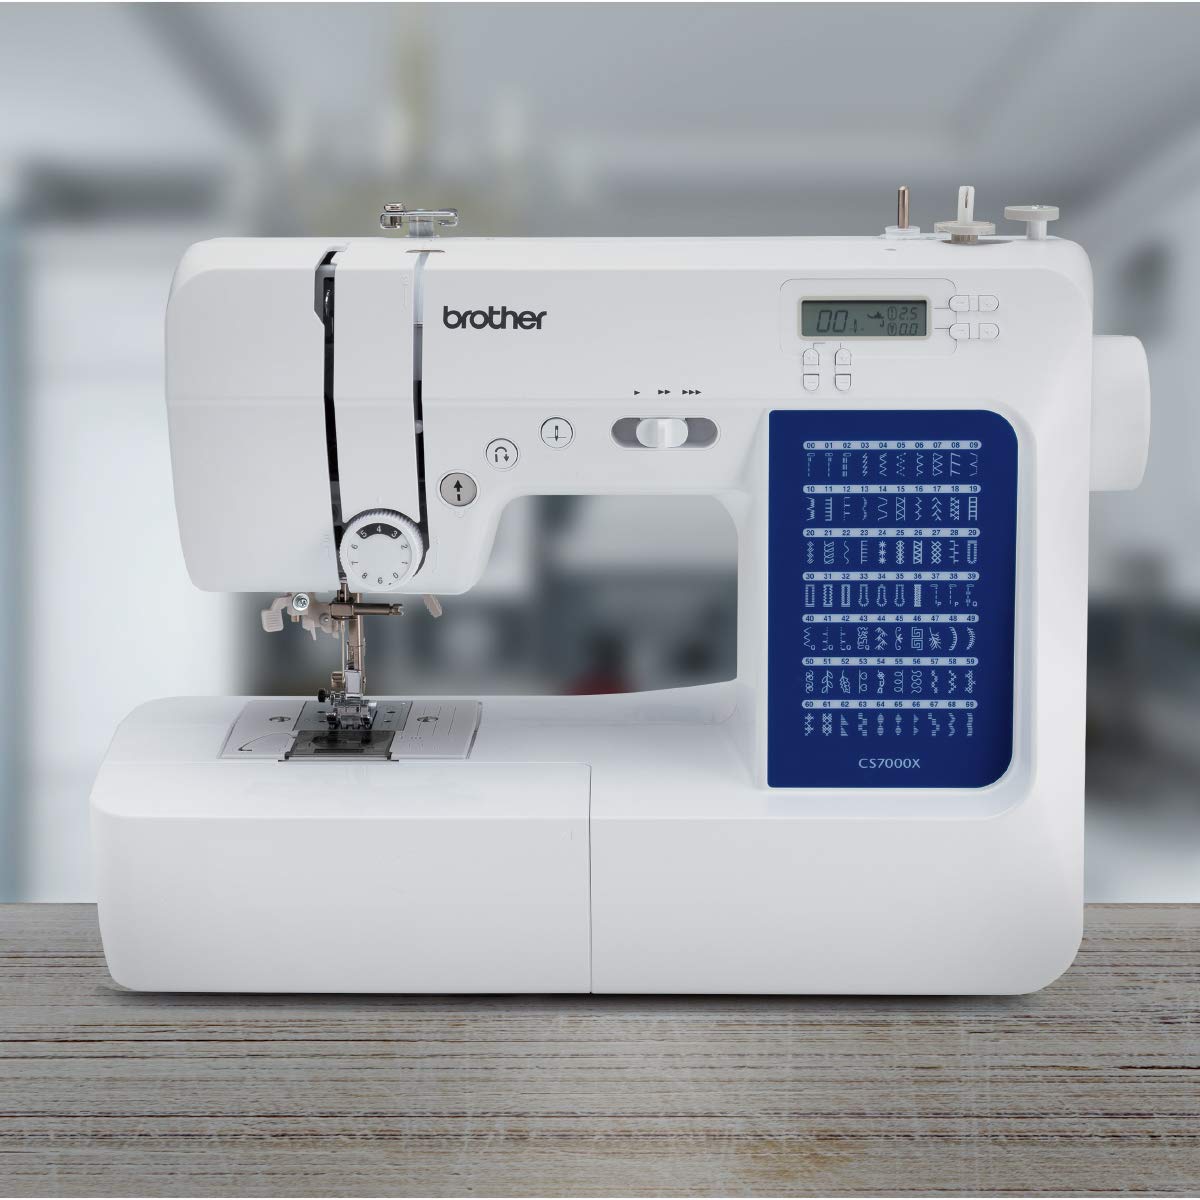 Brother CS7000X Computerized Sewing and Quilting Machine, 70 Built-in Stitches, LCD Display, Wide Table, 10 Included Feet